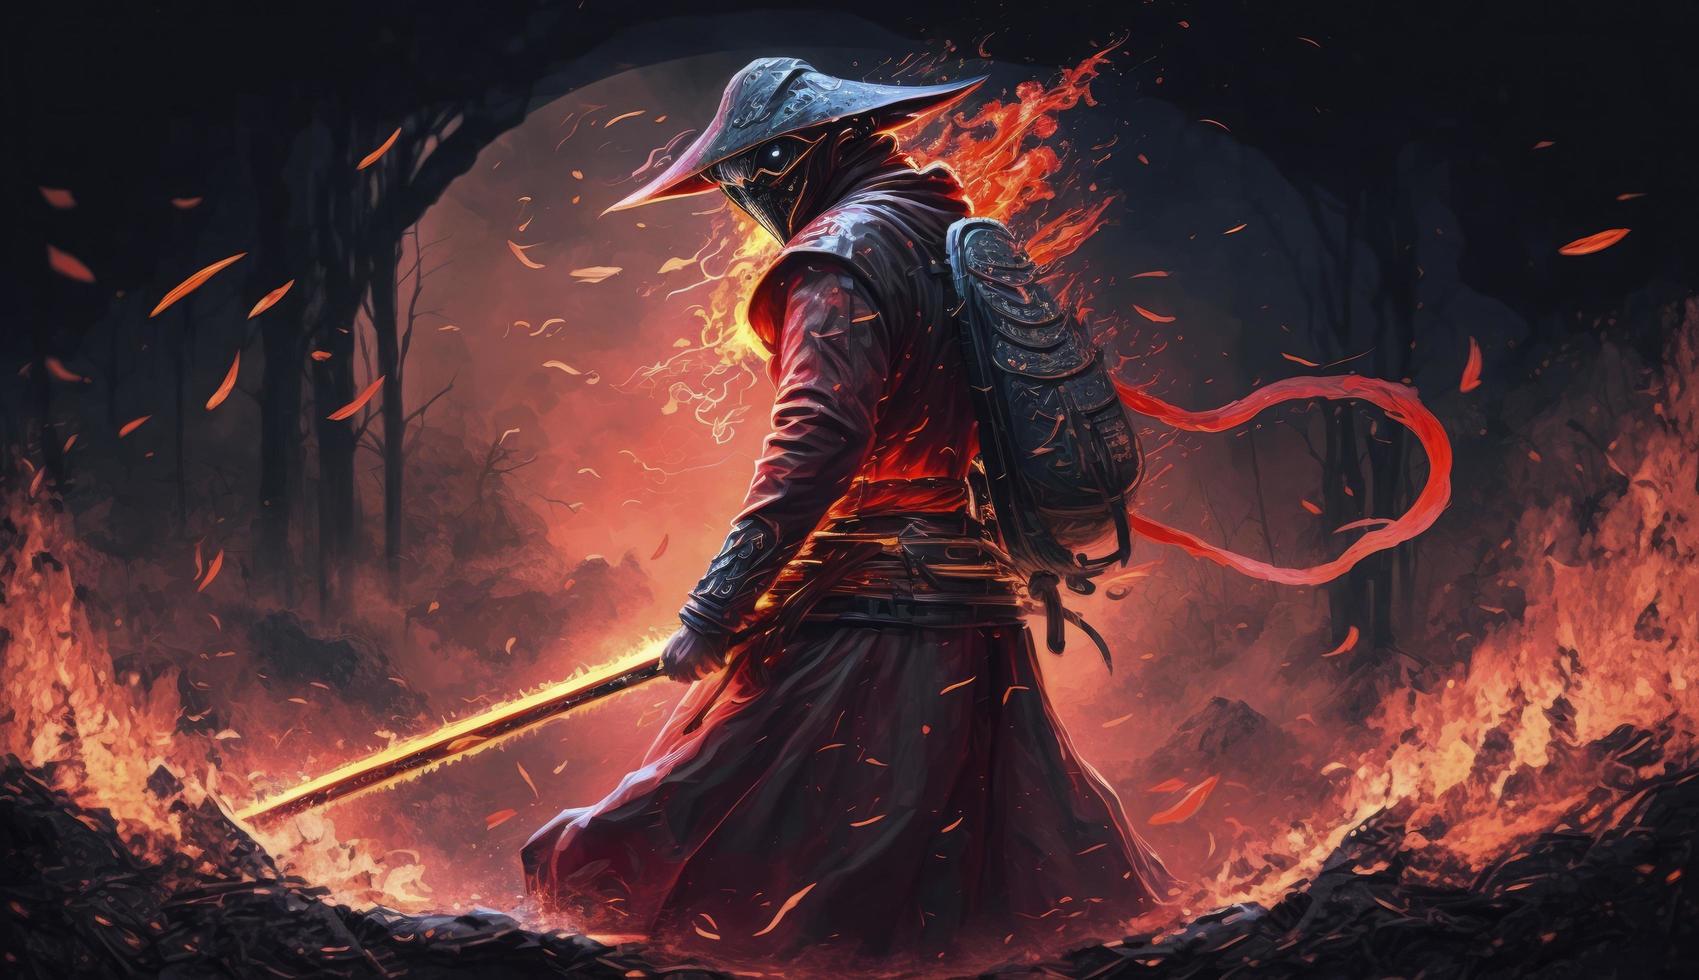 A samurai in a demonic red mask on the battlefield makes a swing with a katana creating a sizzling fire ring around, he is a mystical martial. illustration painting, Generate Ai photo